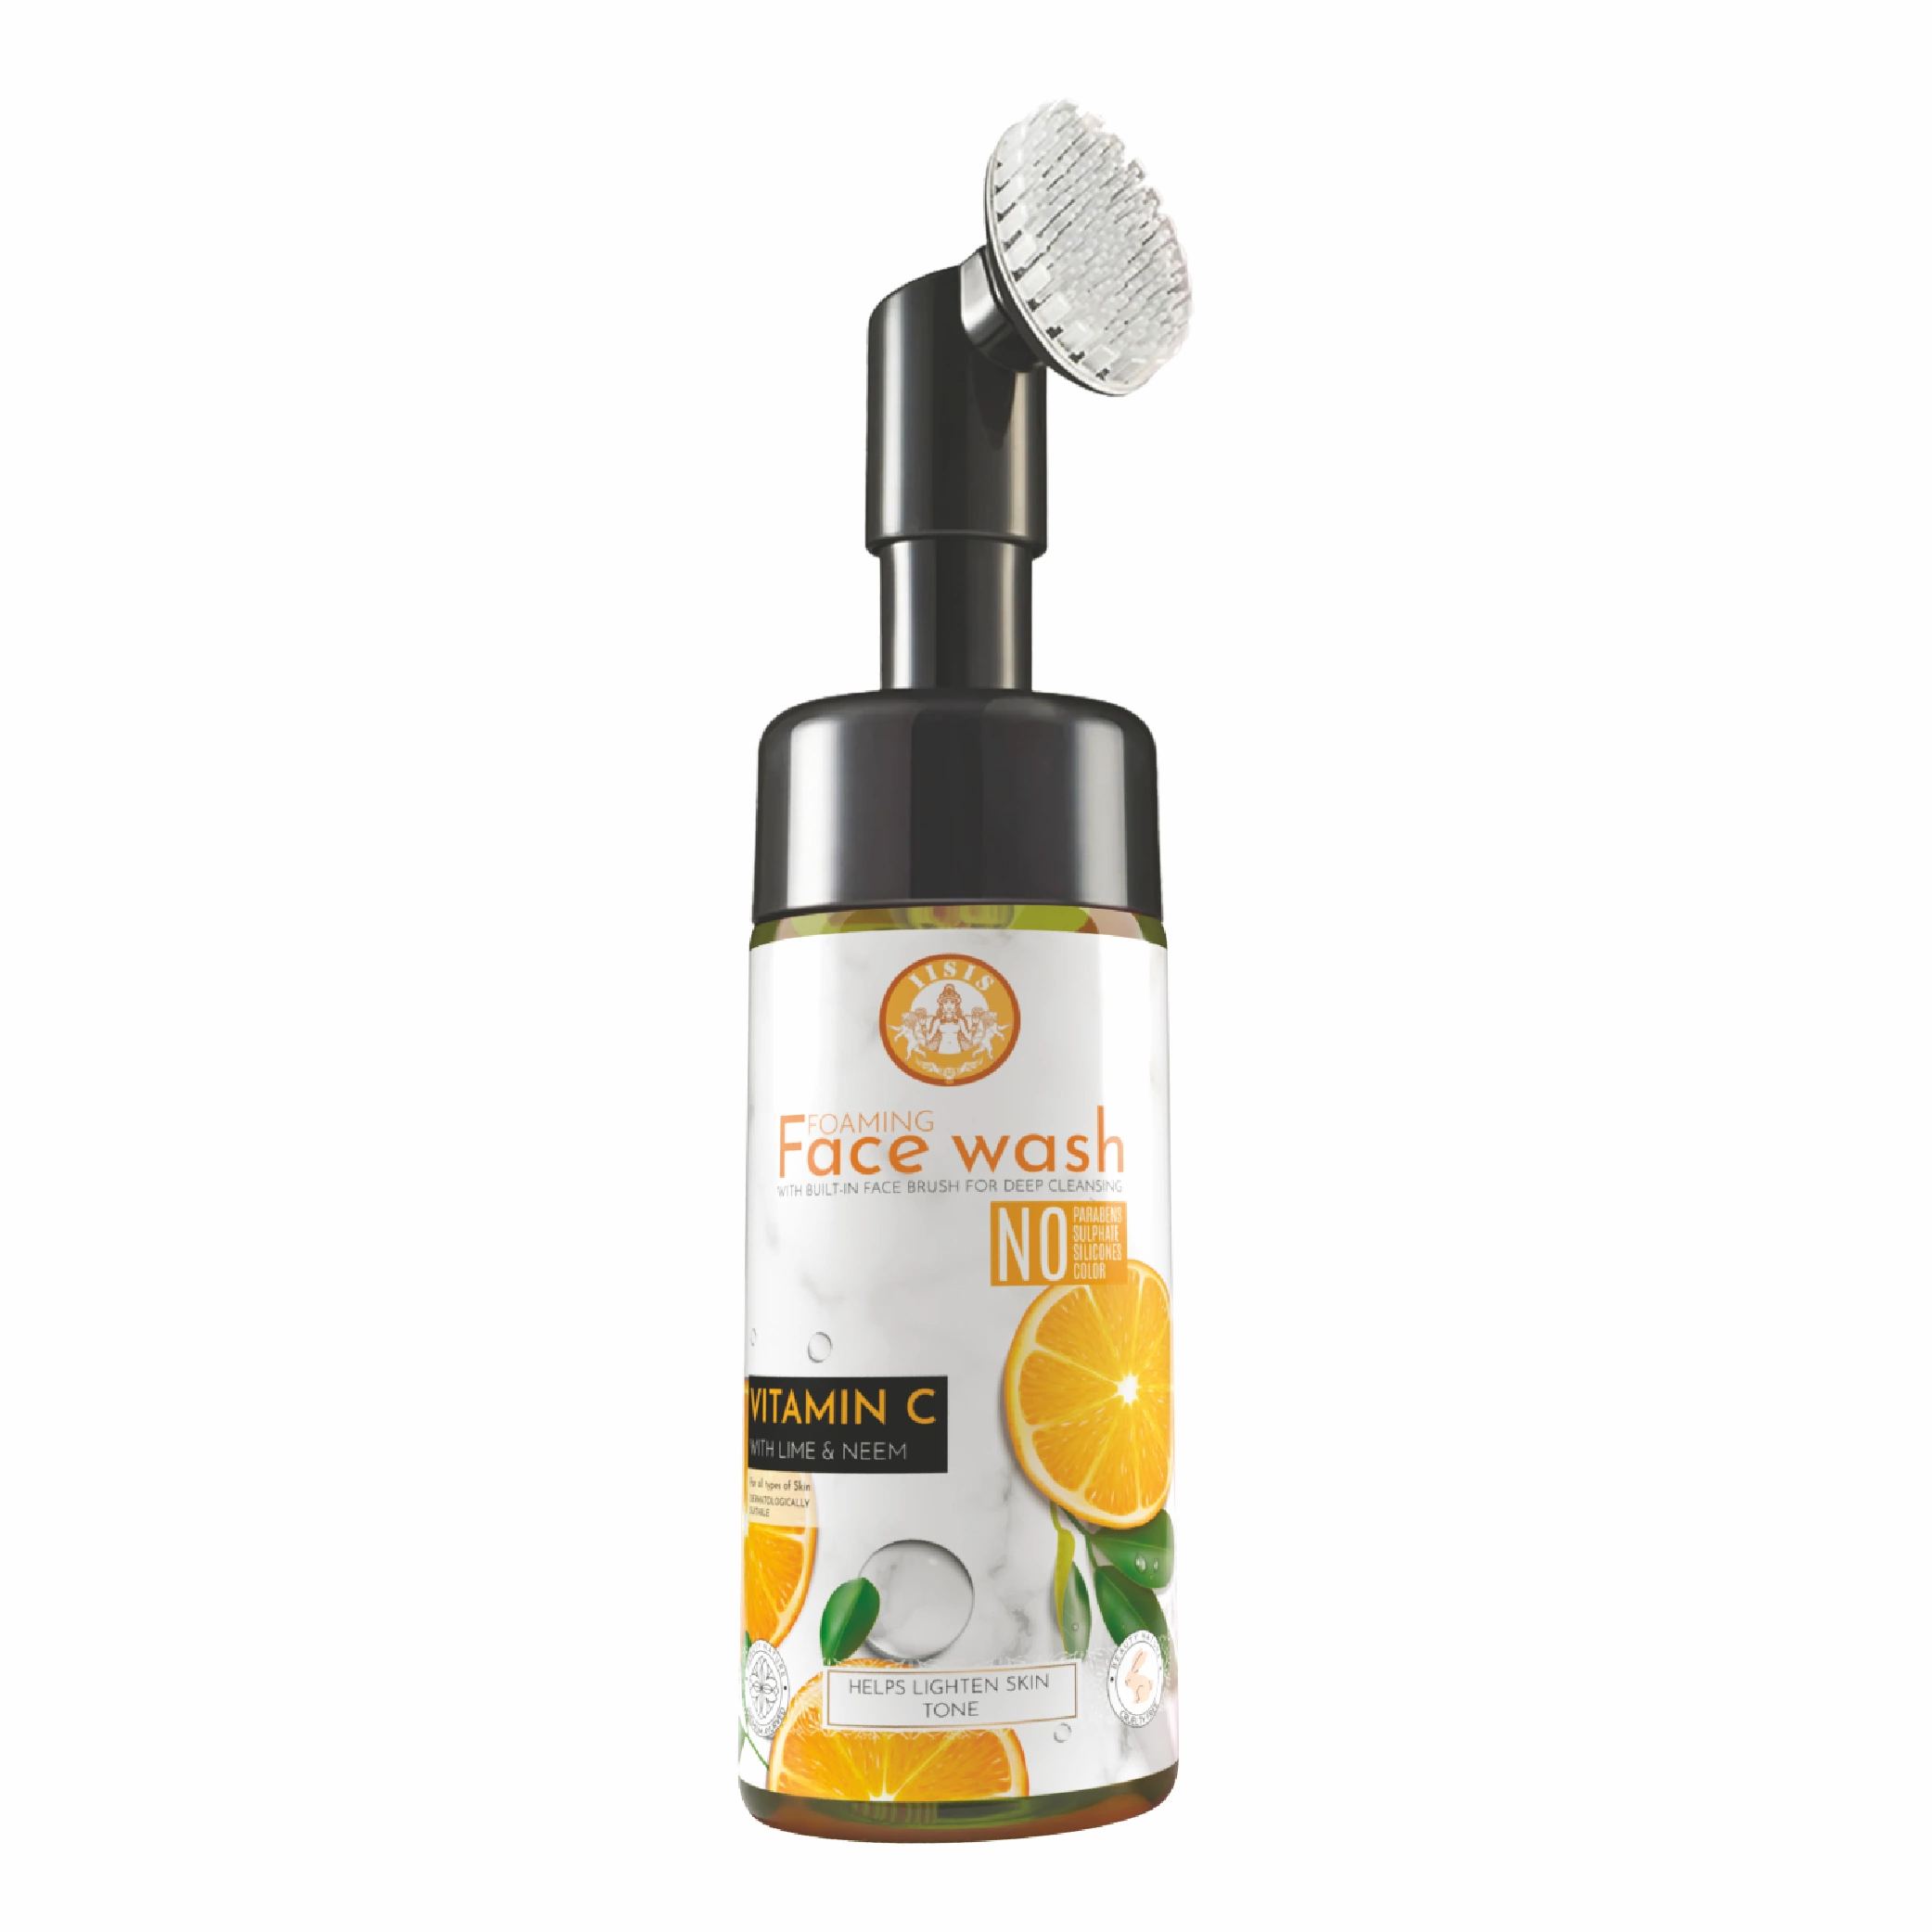 Vitamin C With Lime & Neem Foaming Face Wash With Built-In Face Brush (150ml)